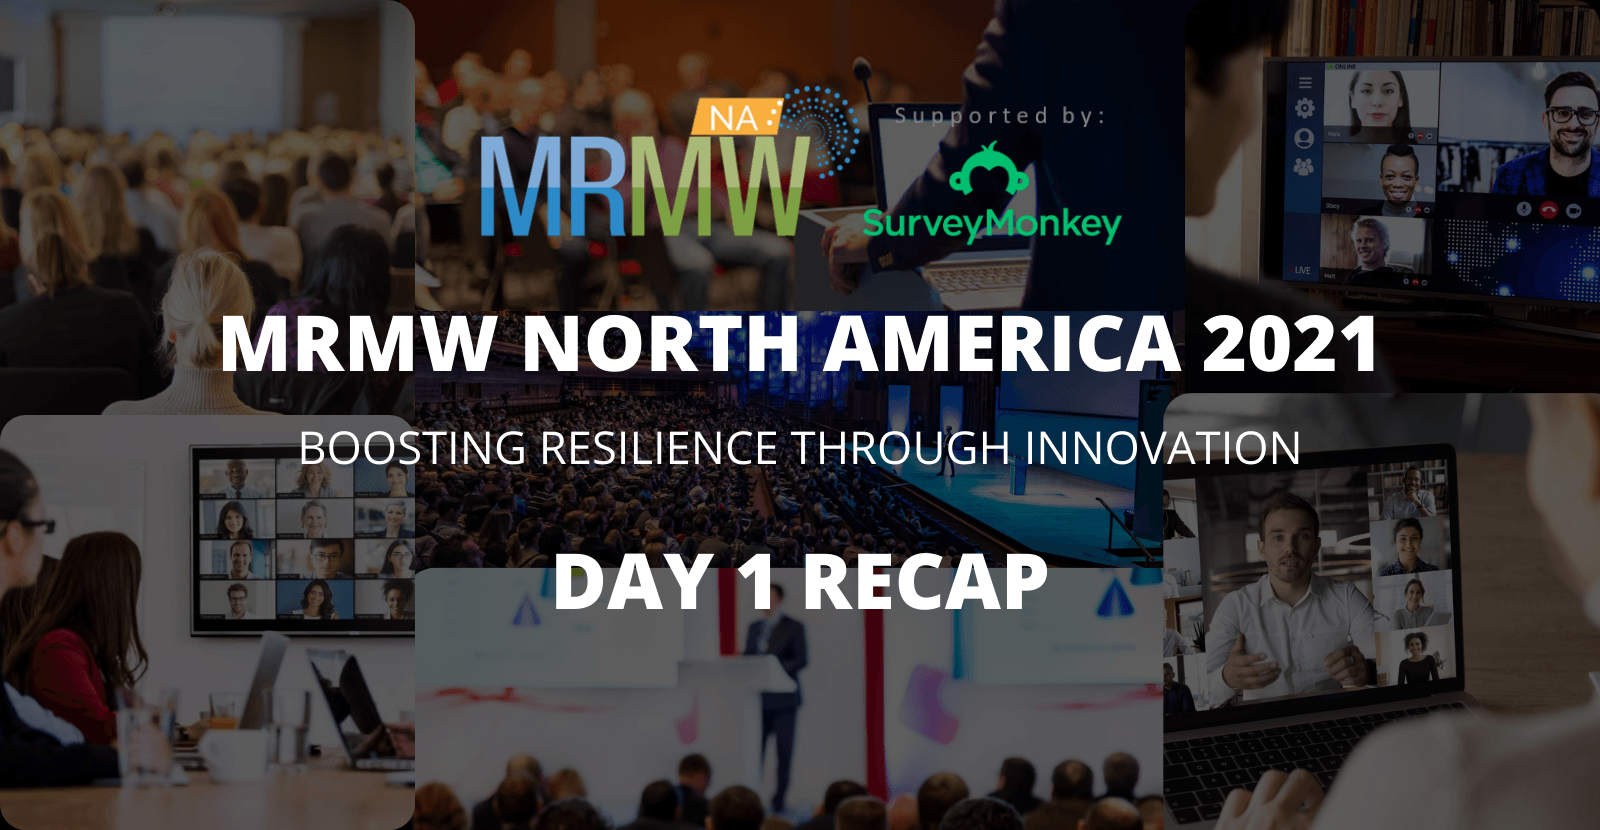 MRMW 2021: A Short Review of Day 1